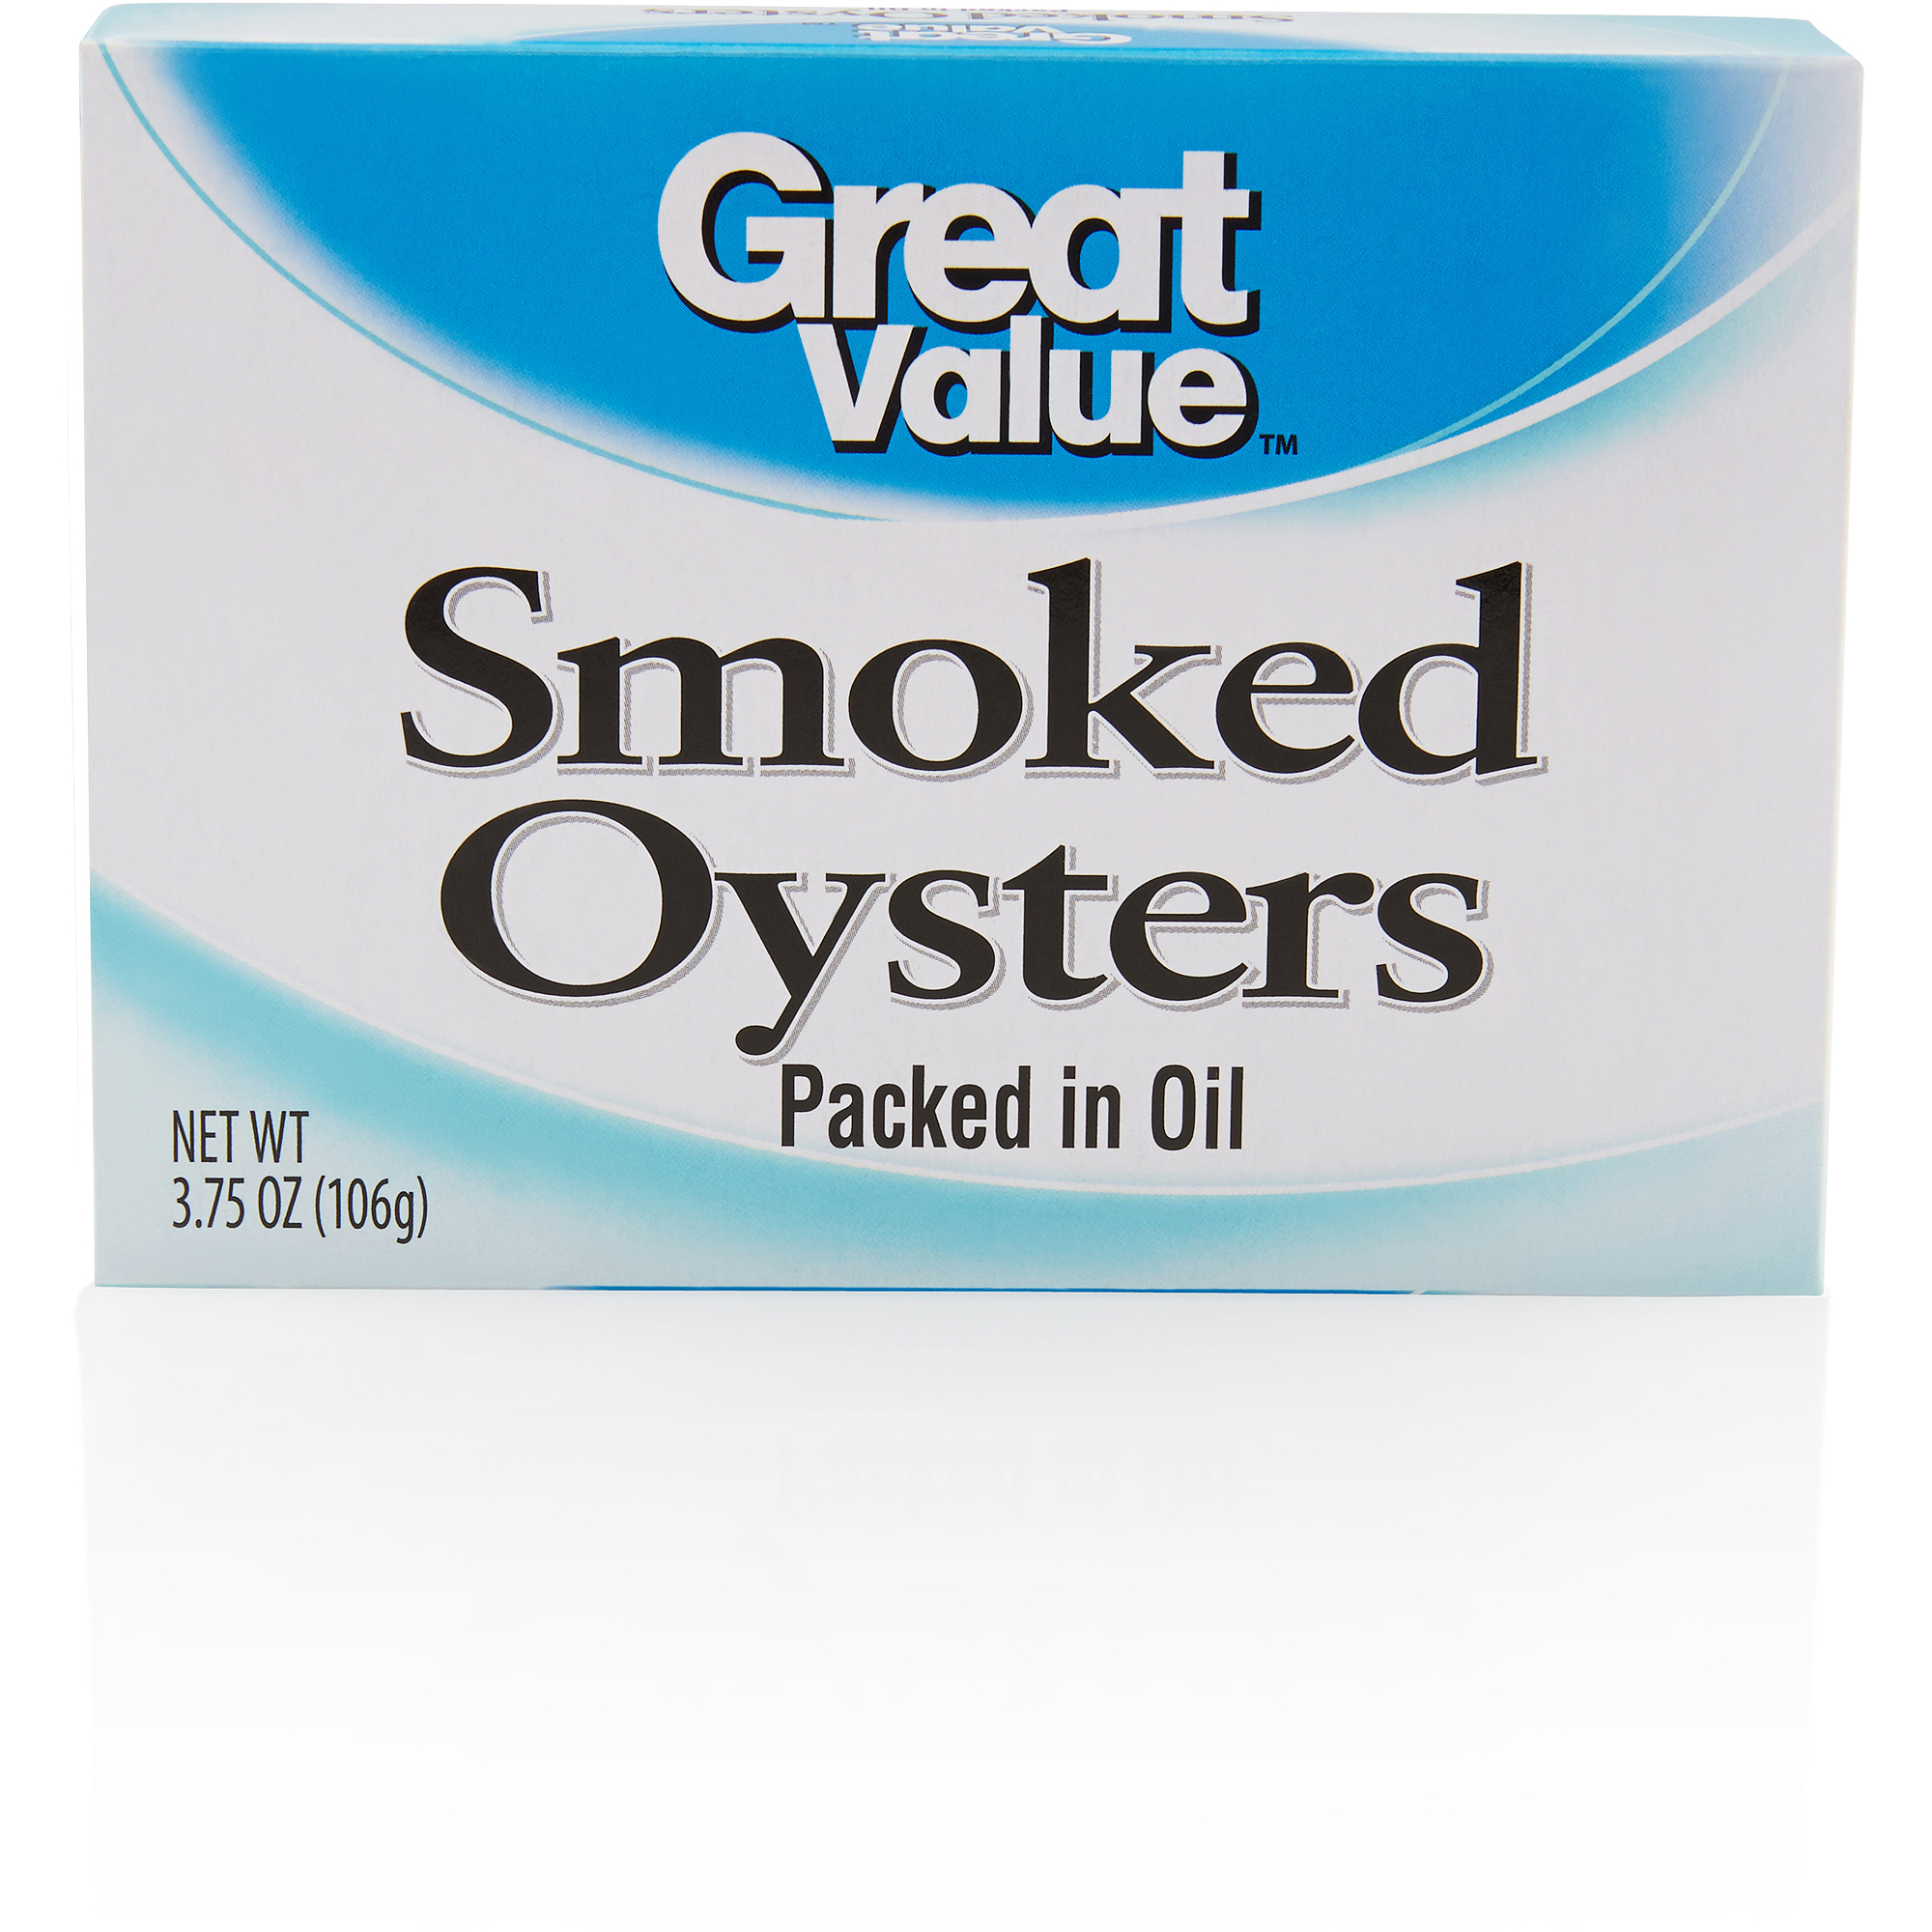 (4 Pack) Great Value Smoked Oysters in Oil, 3.75 Oz